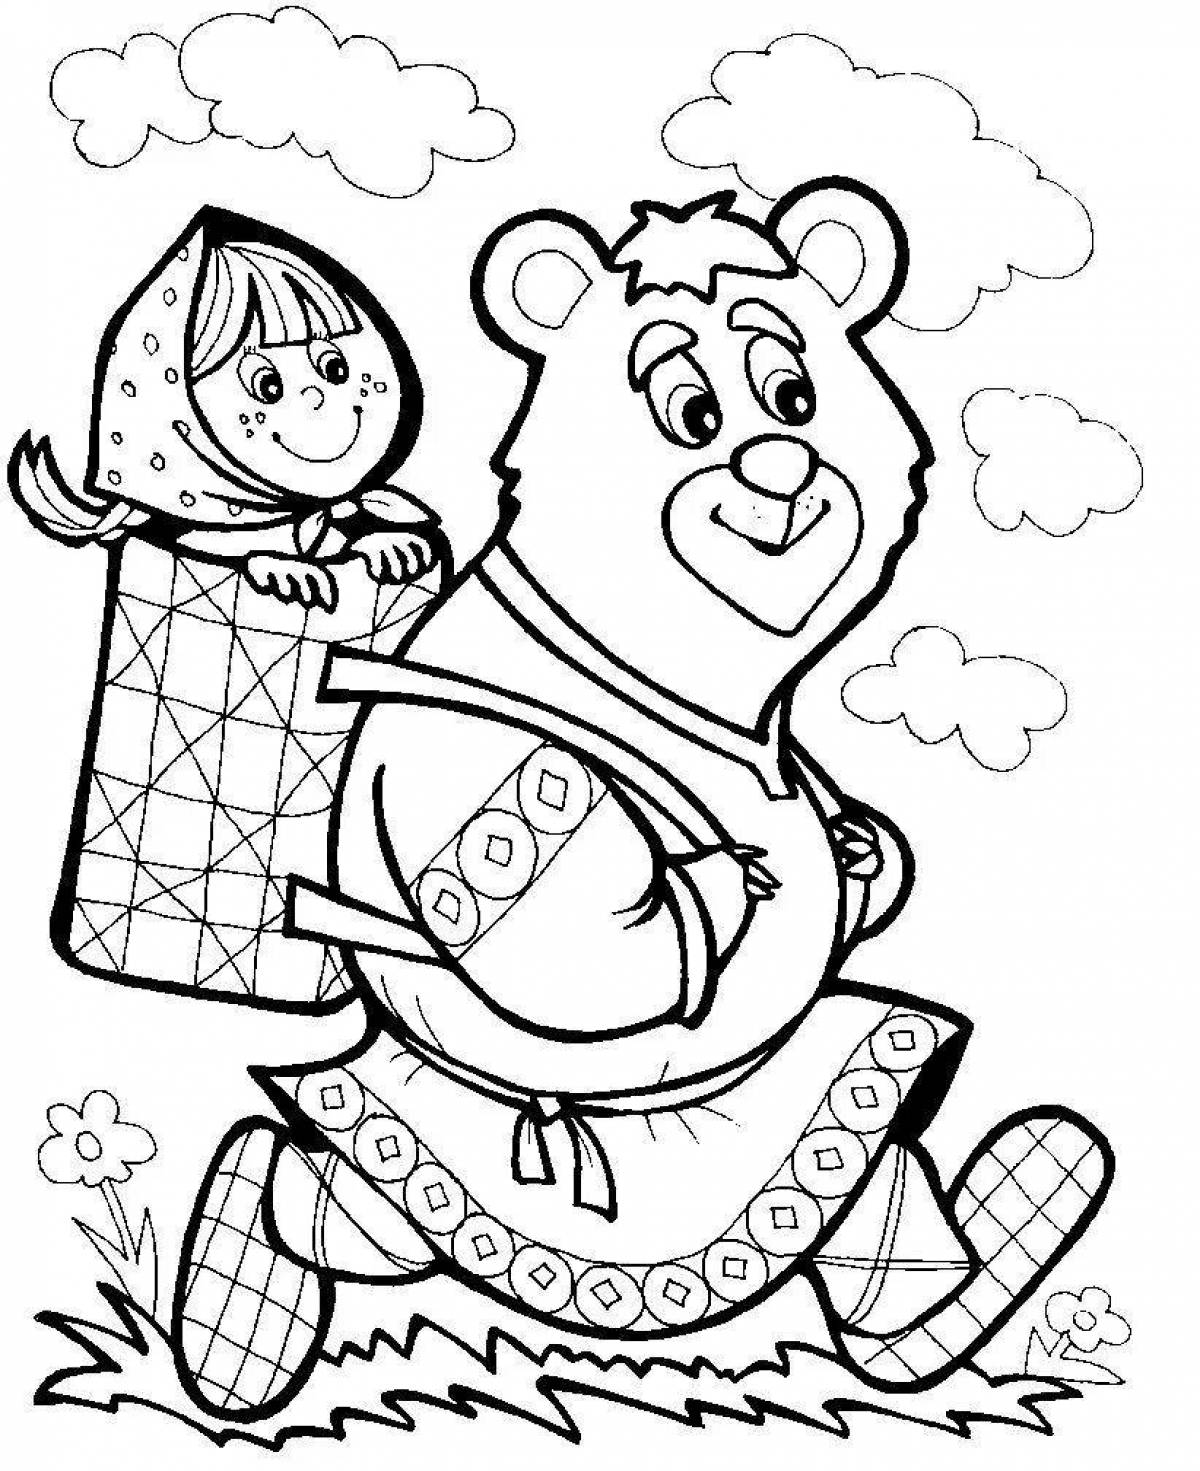 Playful coloring of fairy tale characters for children 6-7 years old